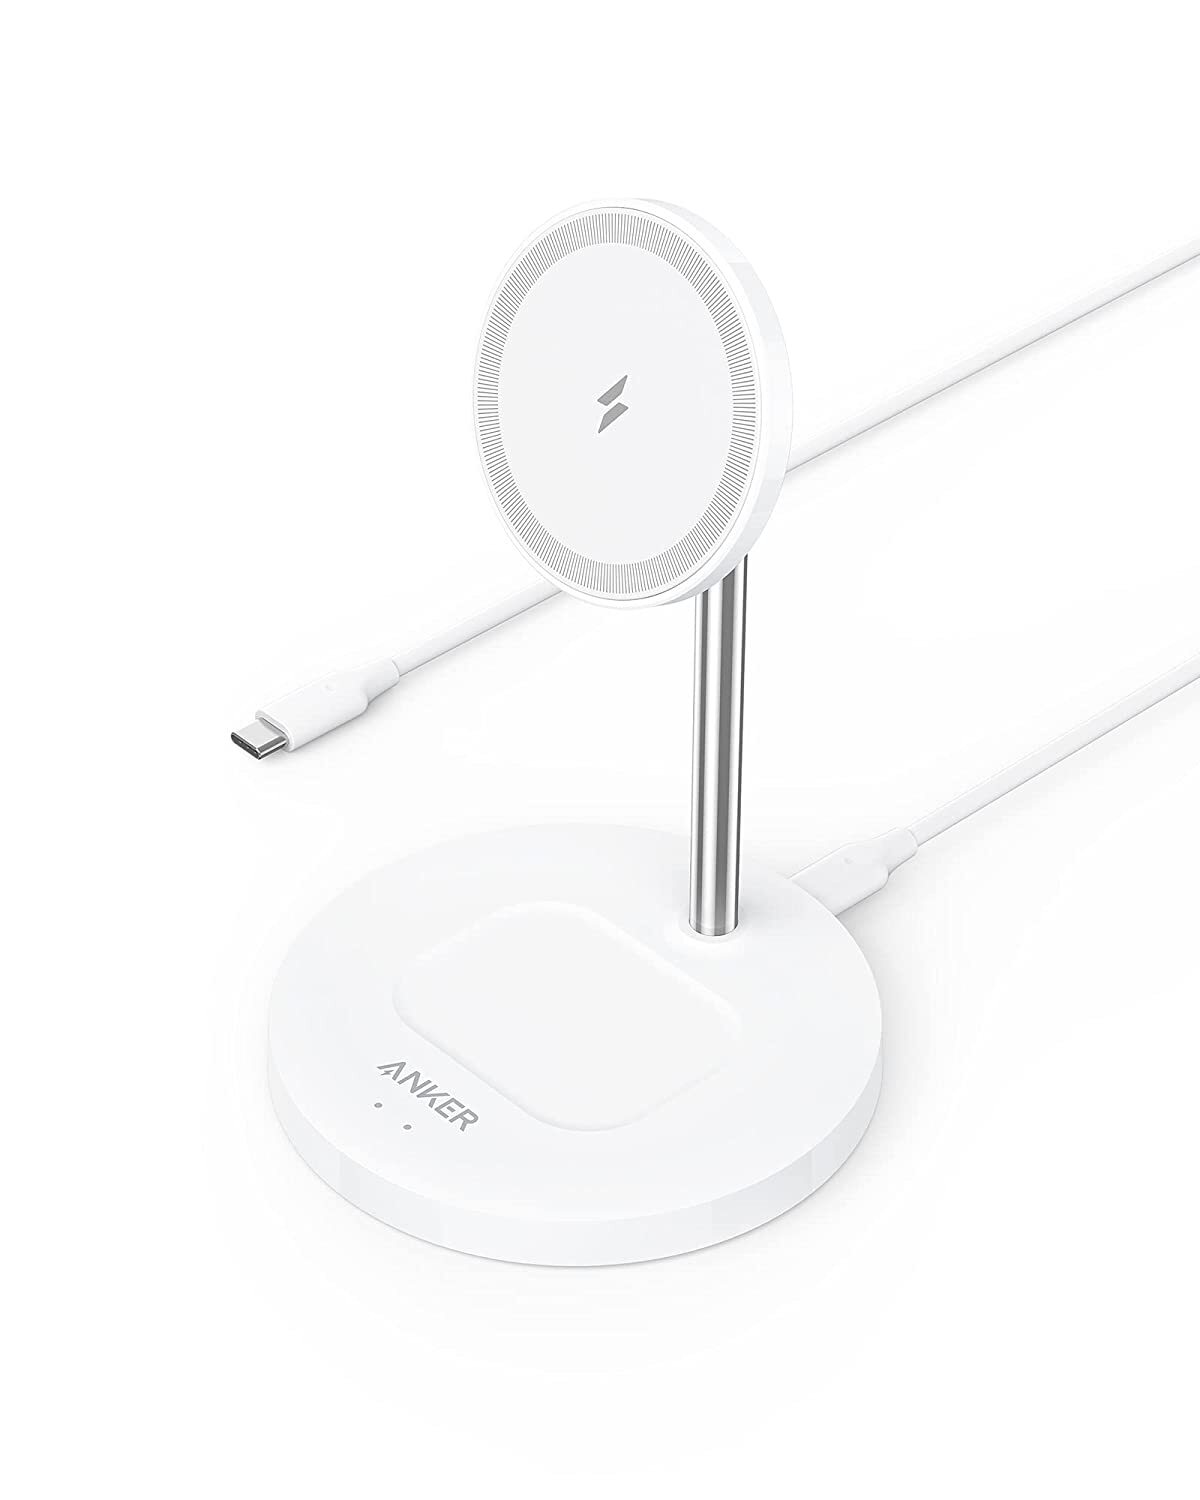 Anker PowerWave Magnetic 2-in-1 Stand White - A2543H21